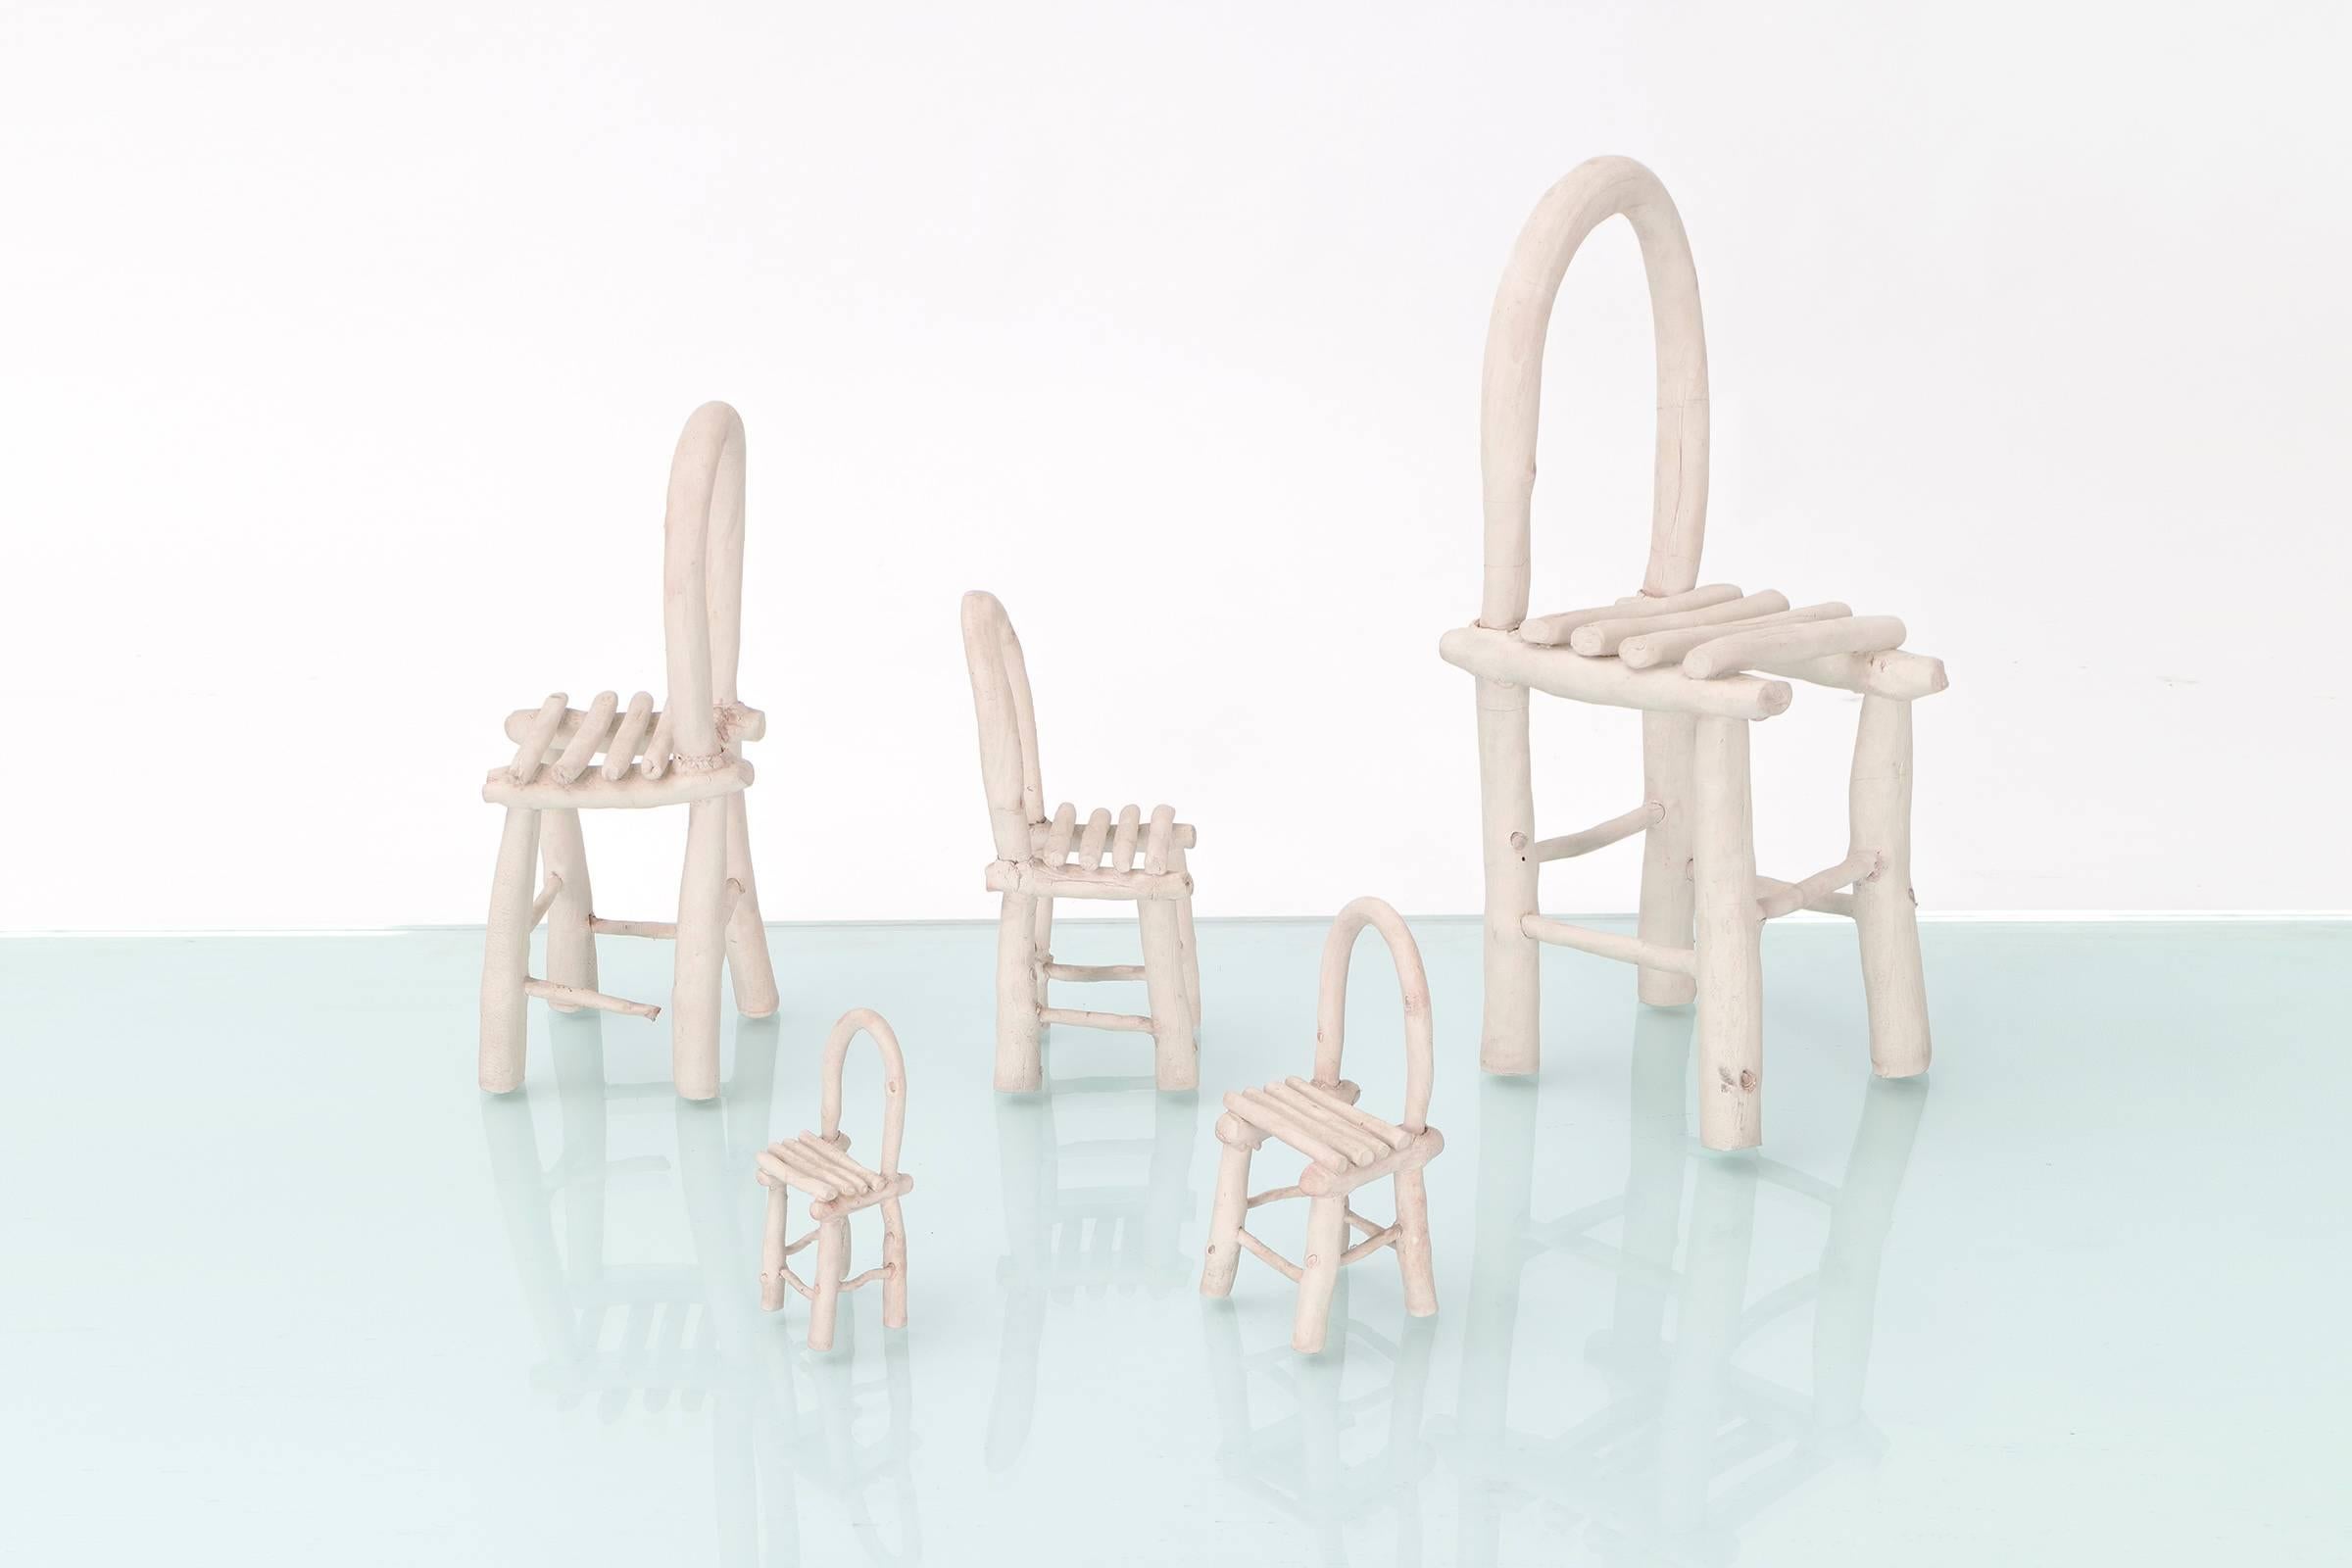 Set of five ceramic chairs sculpture by Chicago based artist Linda Kramer. 

Measures: Chair heights: 5.5